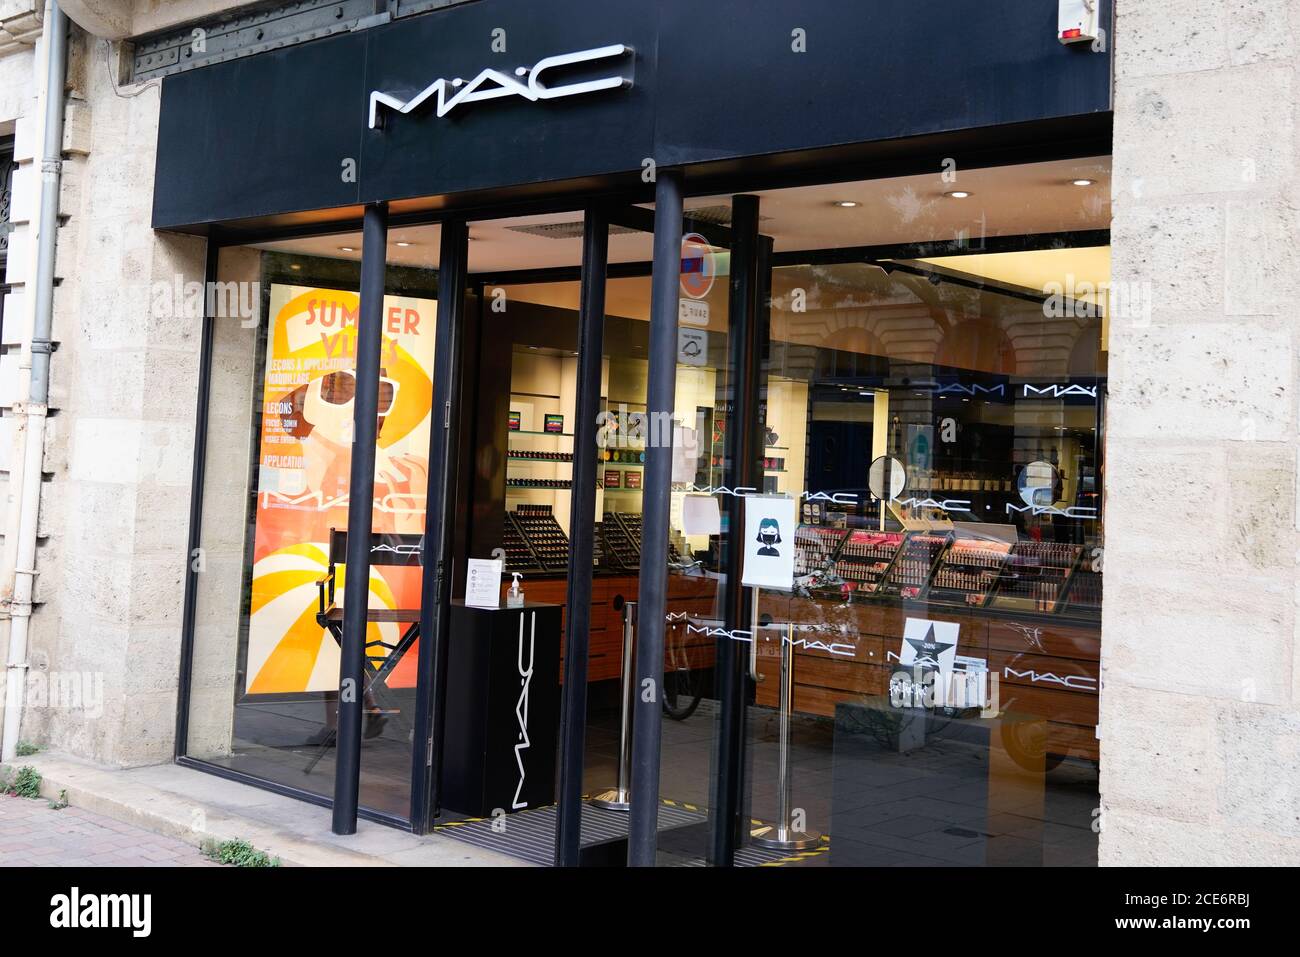 Bordeaux , Aquitaine / France - 08 25 2020 : mac sign and logo of shop Cosmetics Make-up Art manufacturer Stock Photo